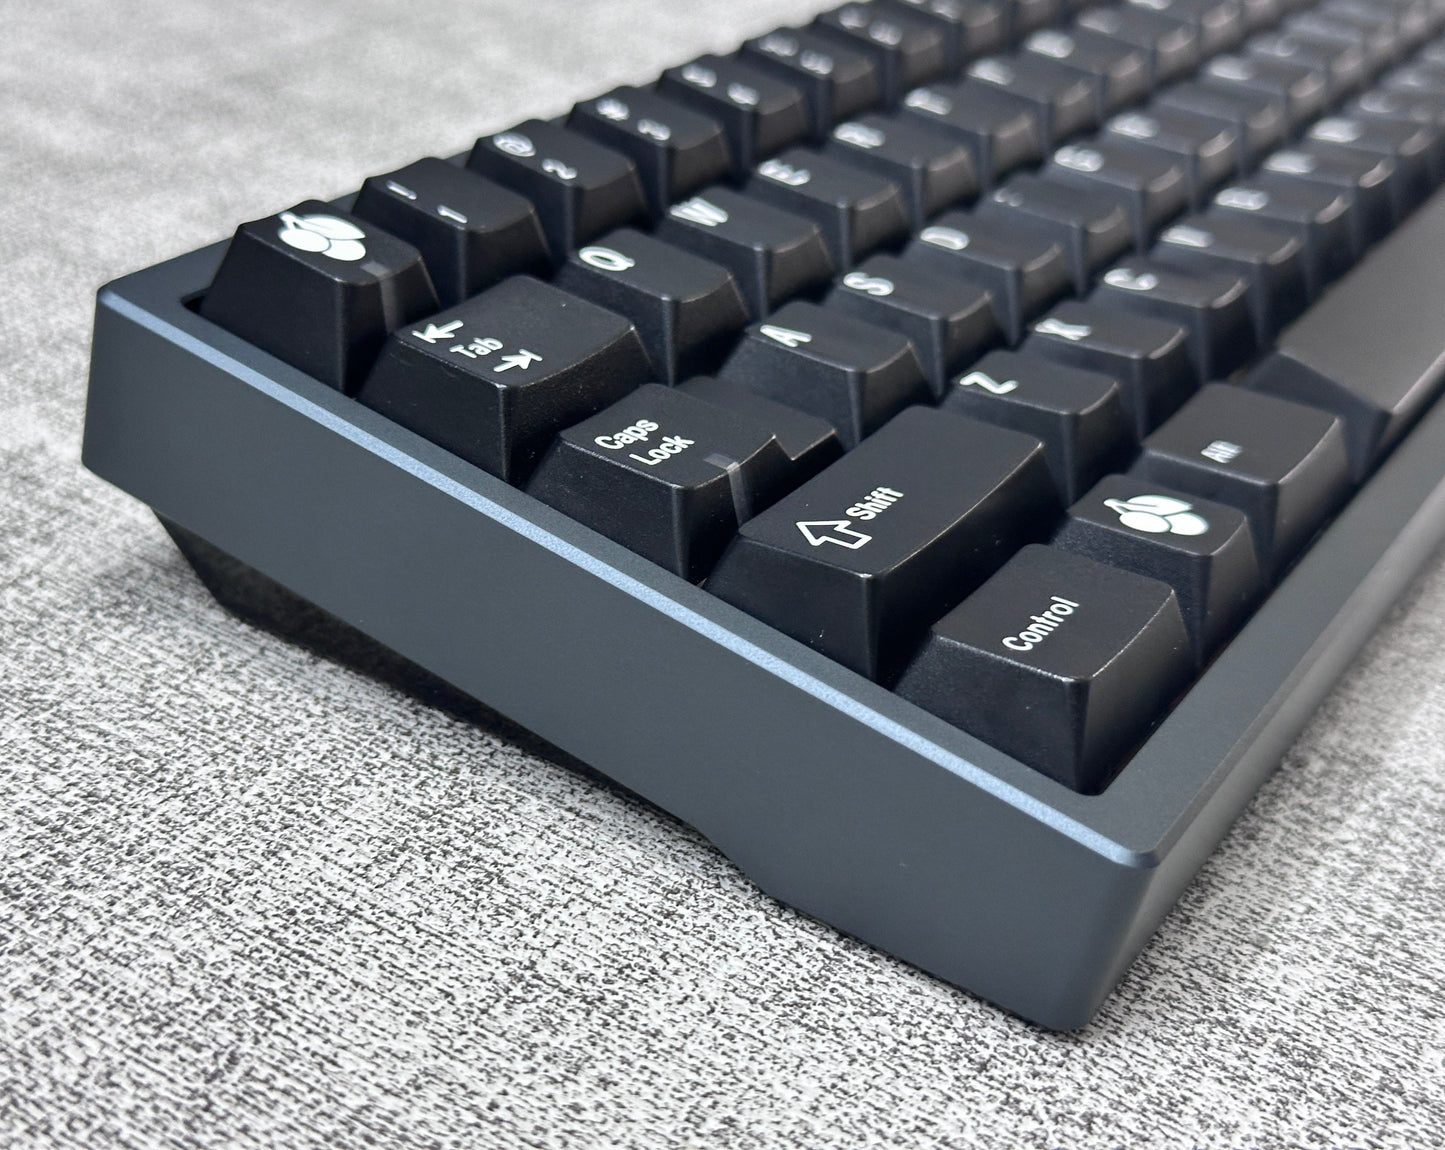 [GB] Krush65 Case and Weight only